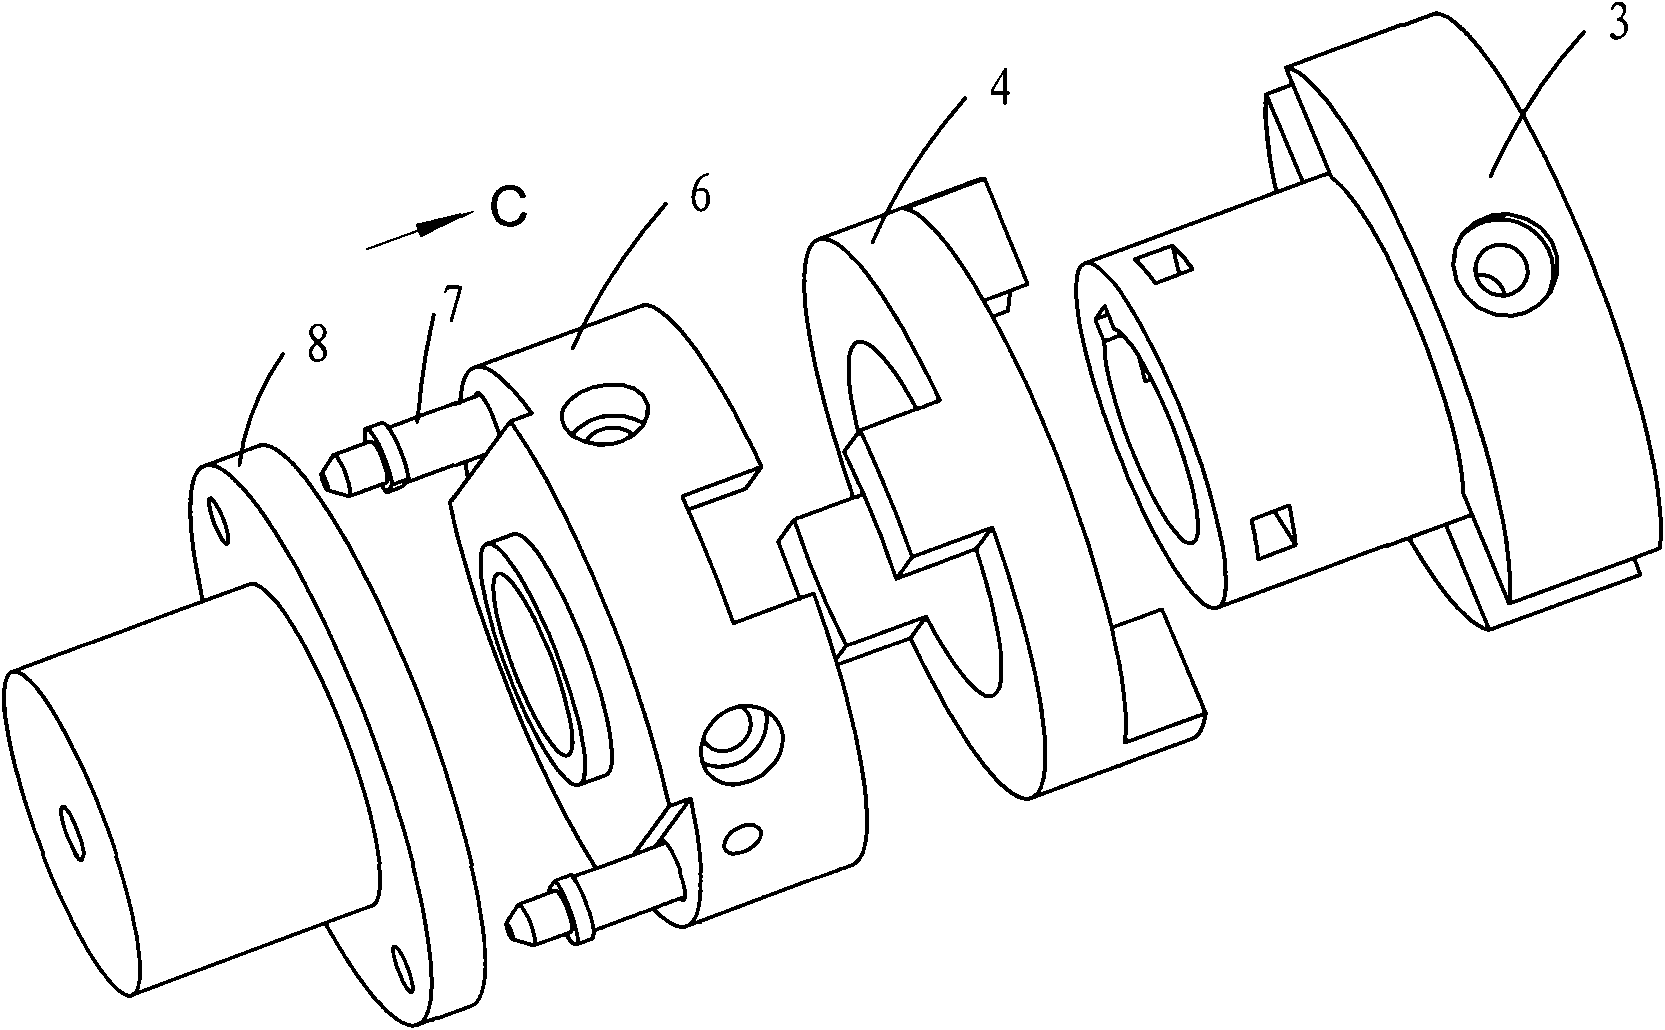 Double slider coupling for drive test of automobile rear axle or final drive assembly